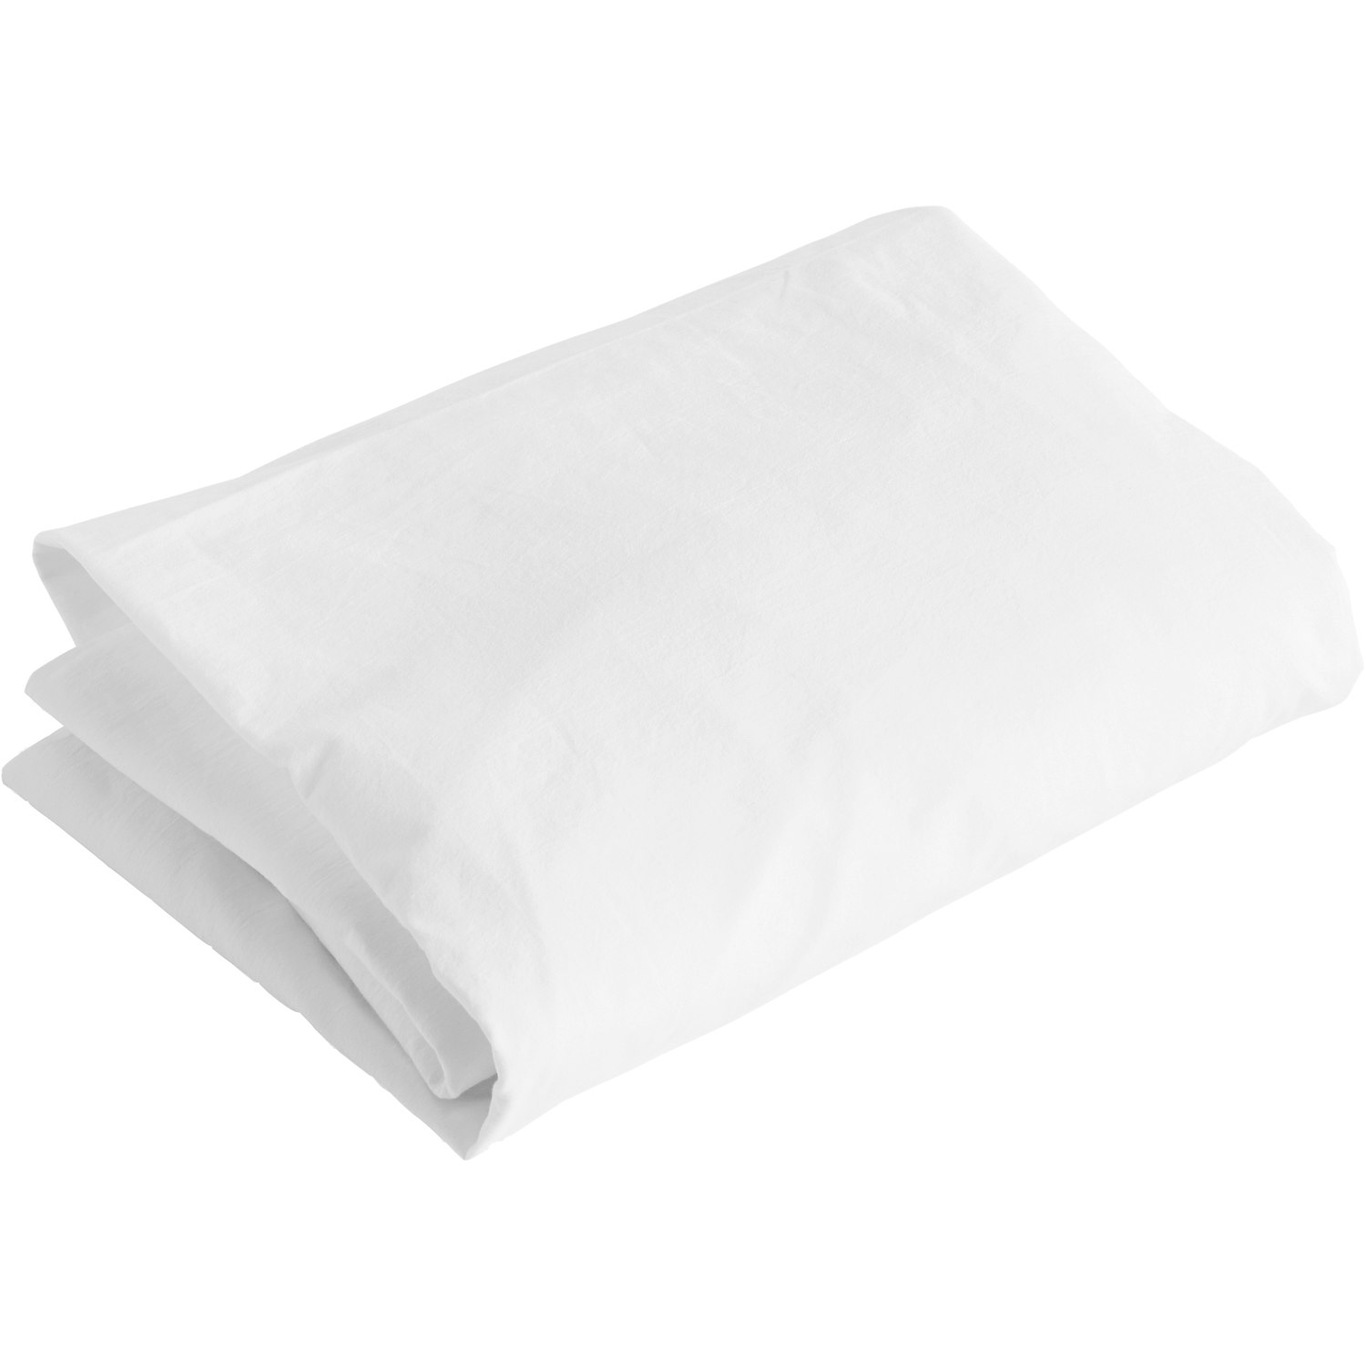 Standard Fitted Sheet 90x200 cm, White